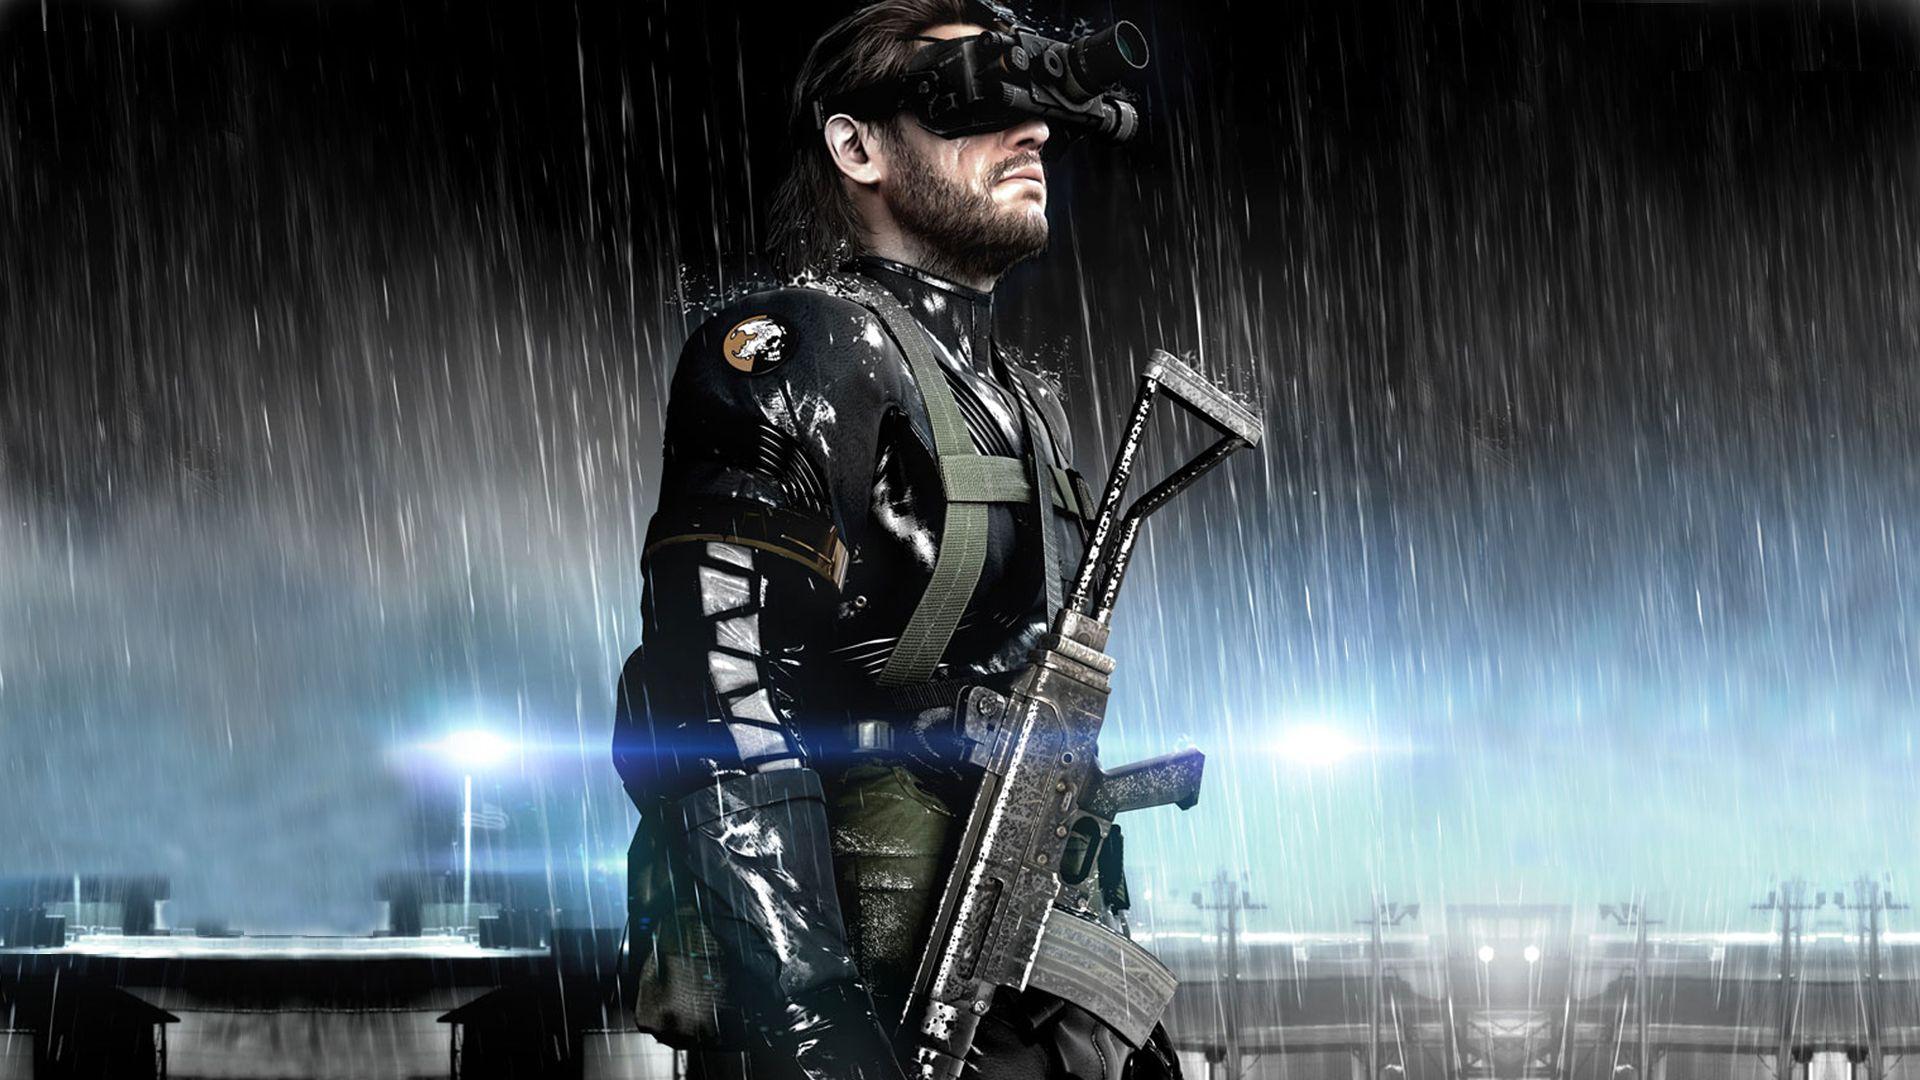 Wallpaper Wallpaper from Metal Gear Solid V: Ground Zeroes